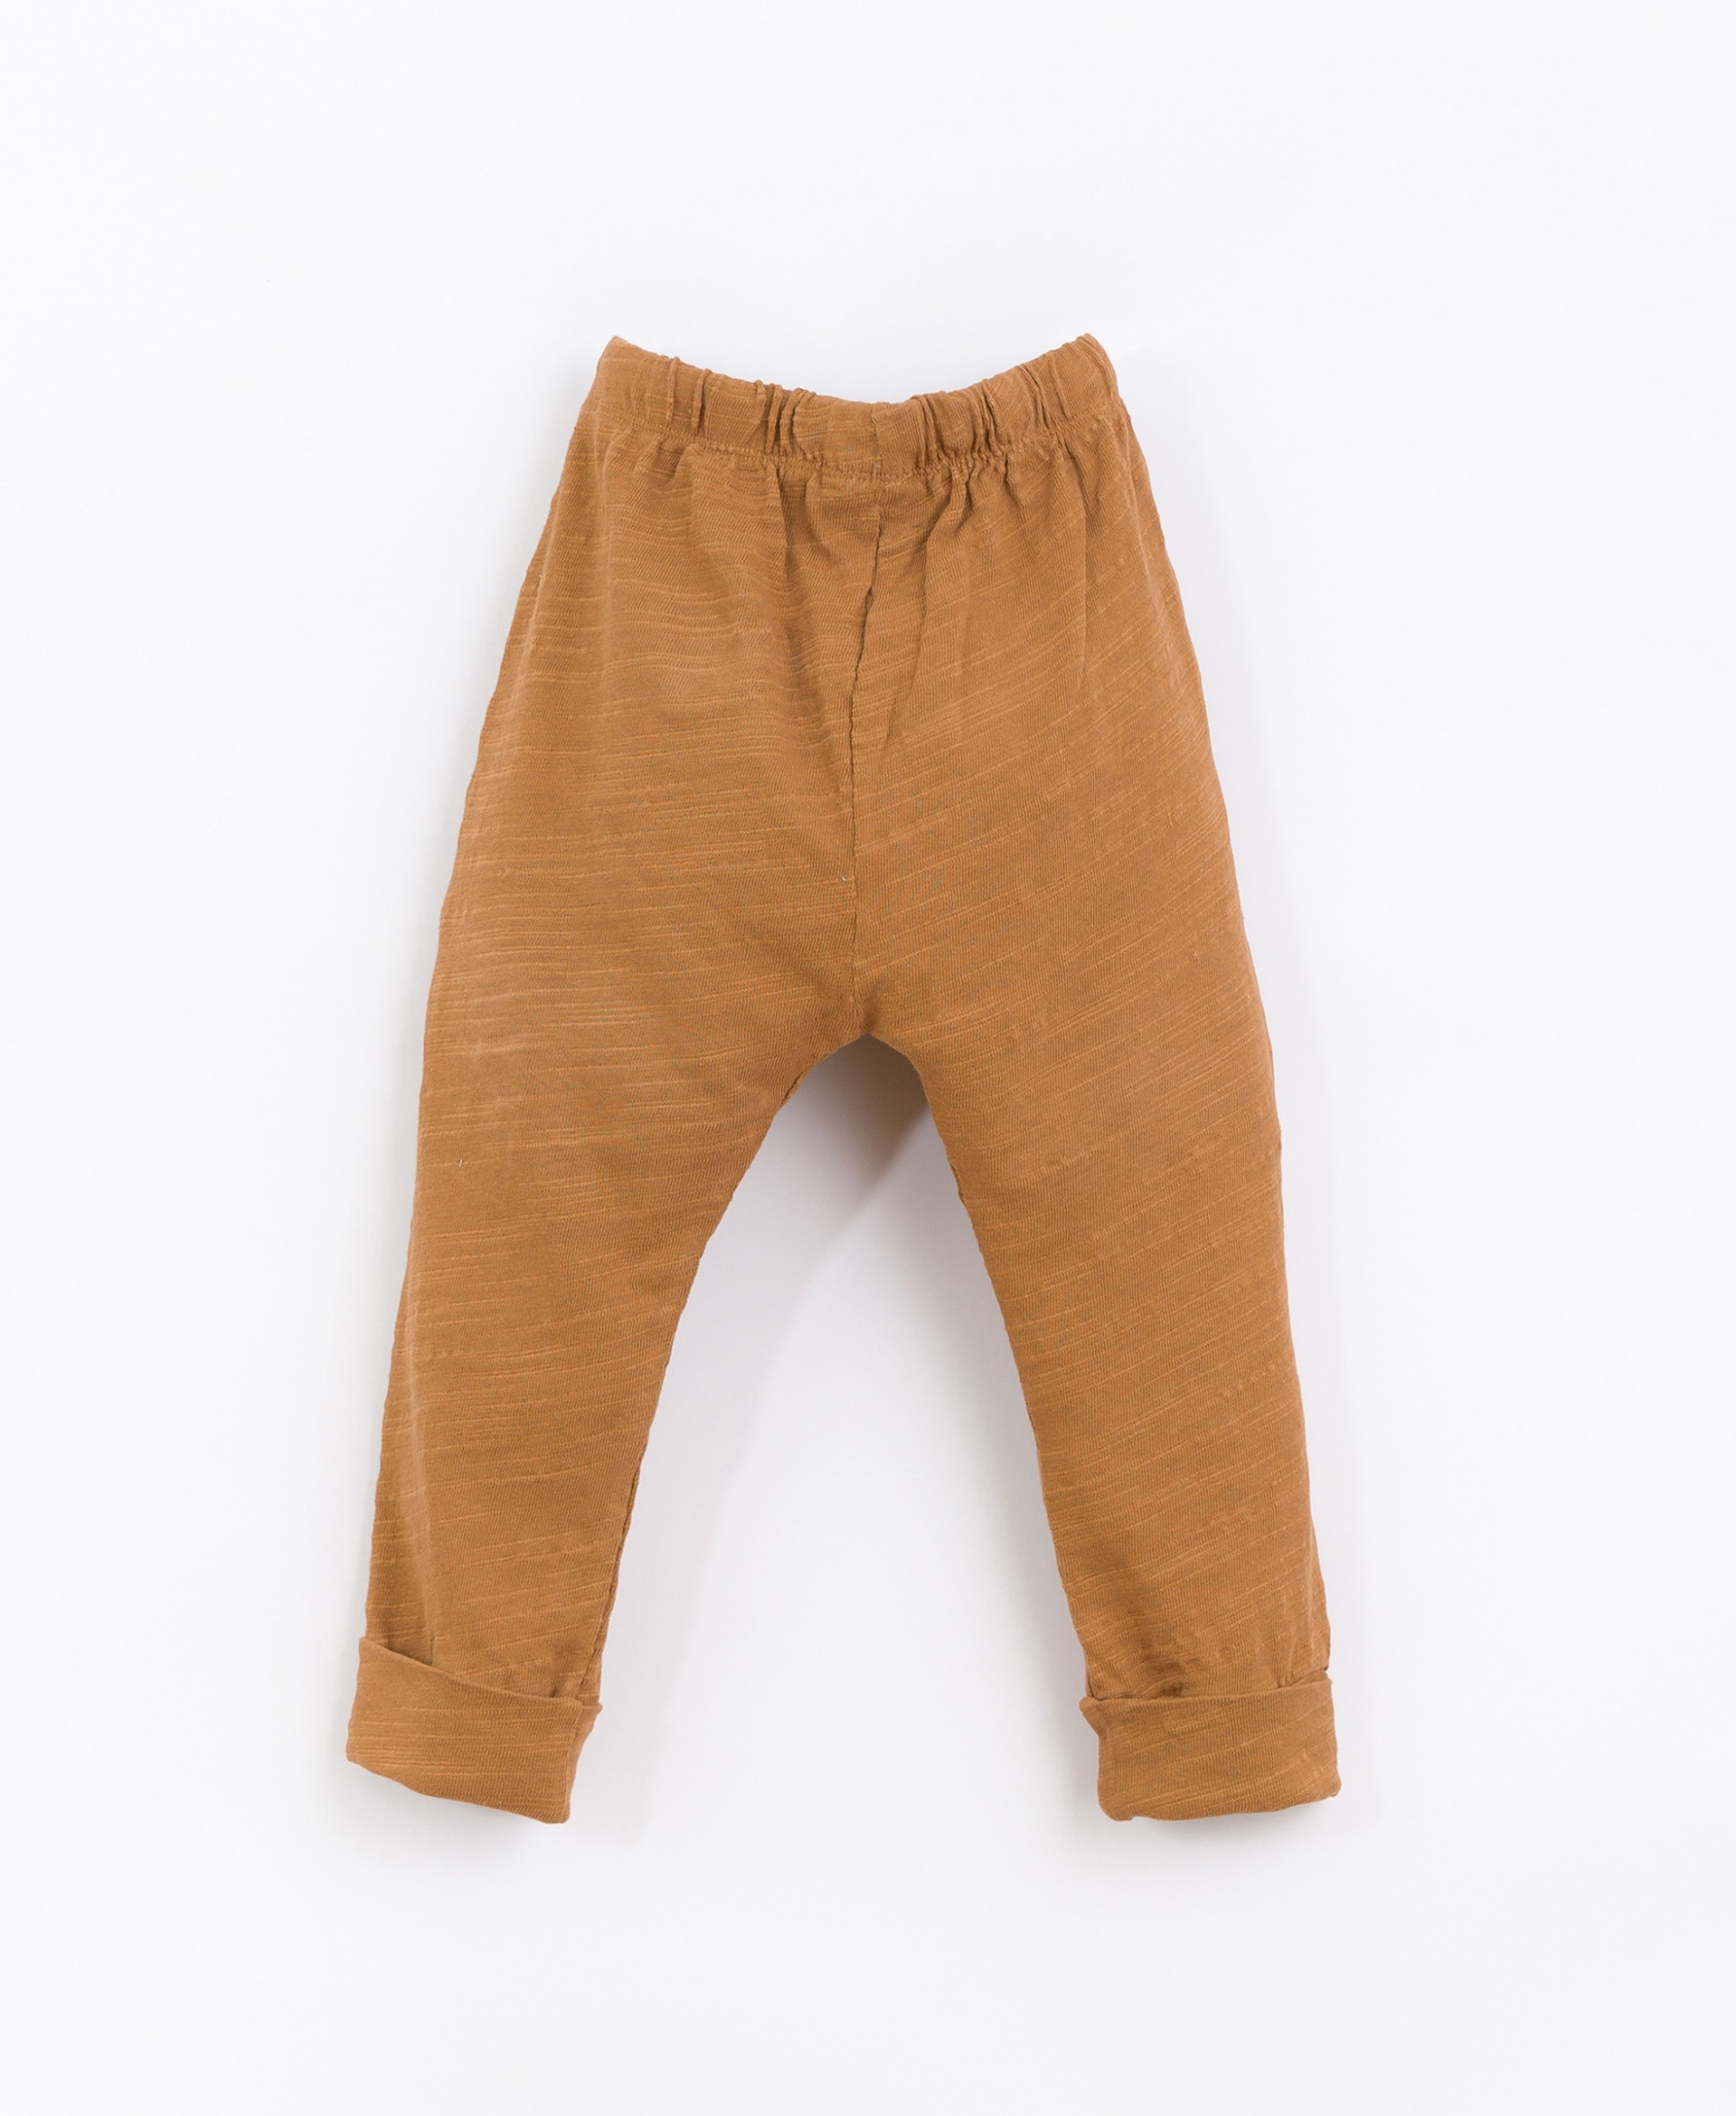 Pants in blend of natural fibers and recycled fibers | Basketry